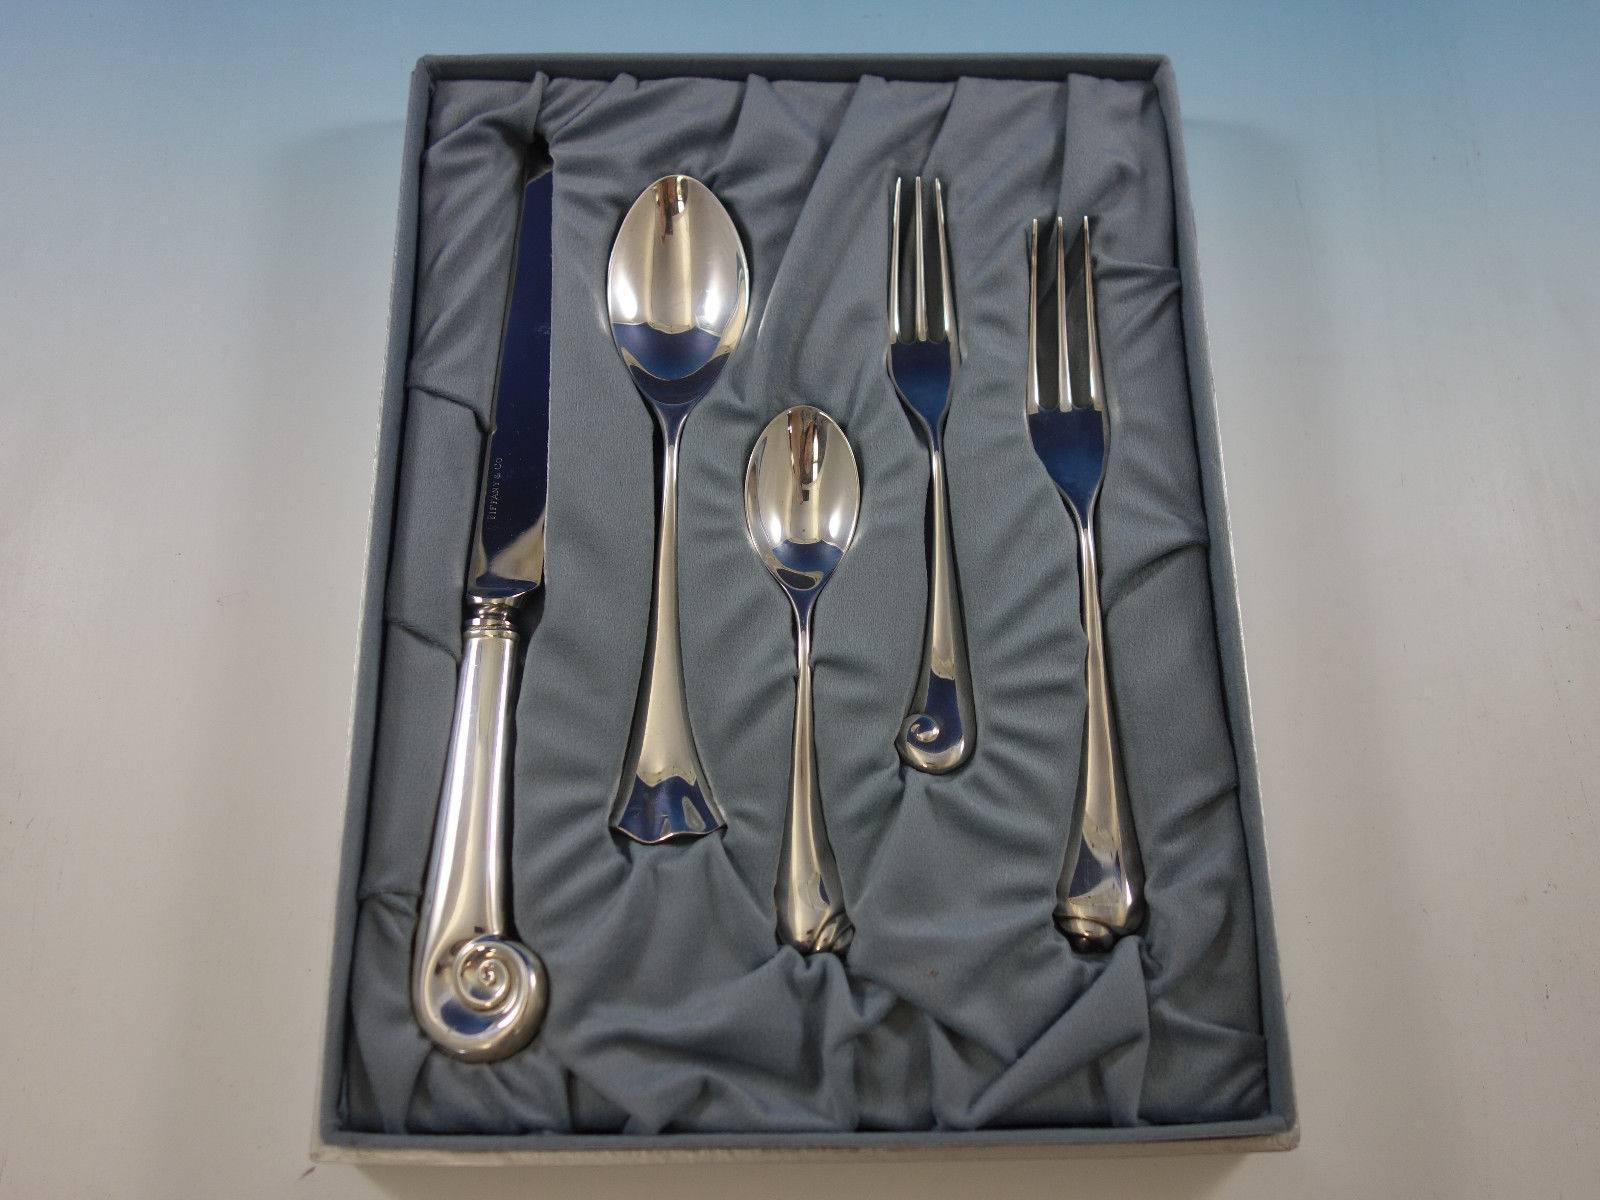 Unique Angela Cummings sterling silver dinner flatware set with fabulous modern shell motif, differing shells, 40 pieces. This set includes: Eight dinner size knives, 6 - 9 3/4